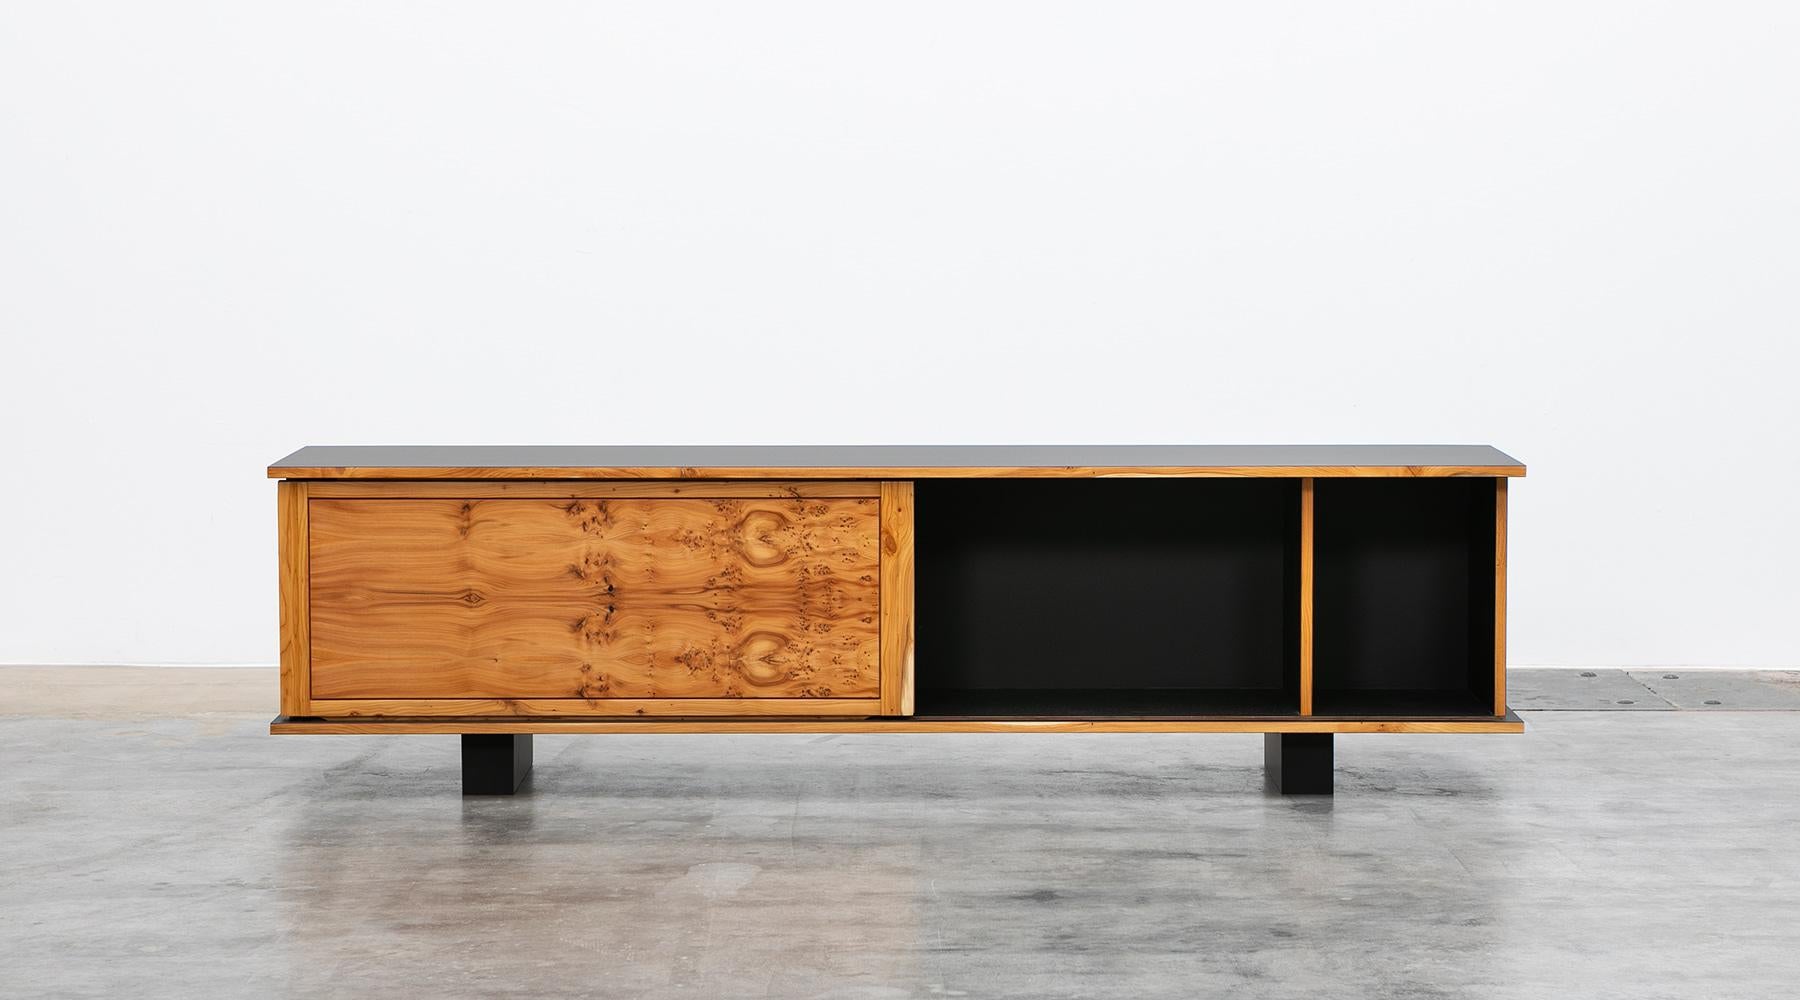 Sideboard by contemporary German artist Johannes Hock. The sliding doors of this unique piece are made of yew wood, the body is made of ultramatt black HPL, as well as the backside. Manufactured by Atelier Johannes Hock.